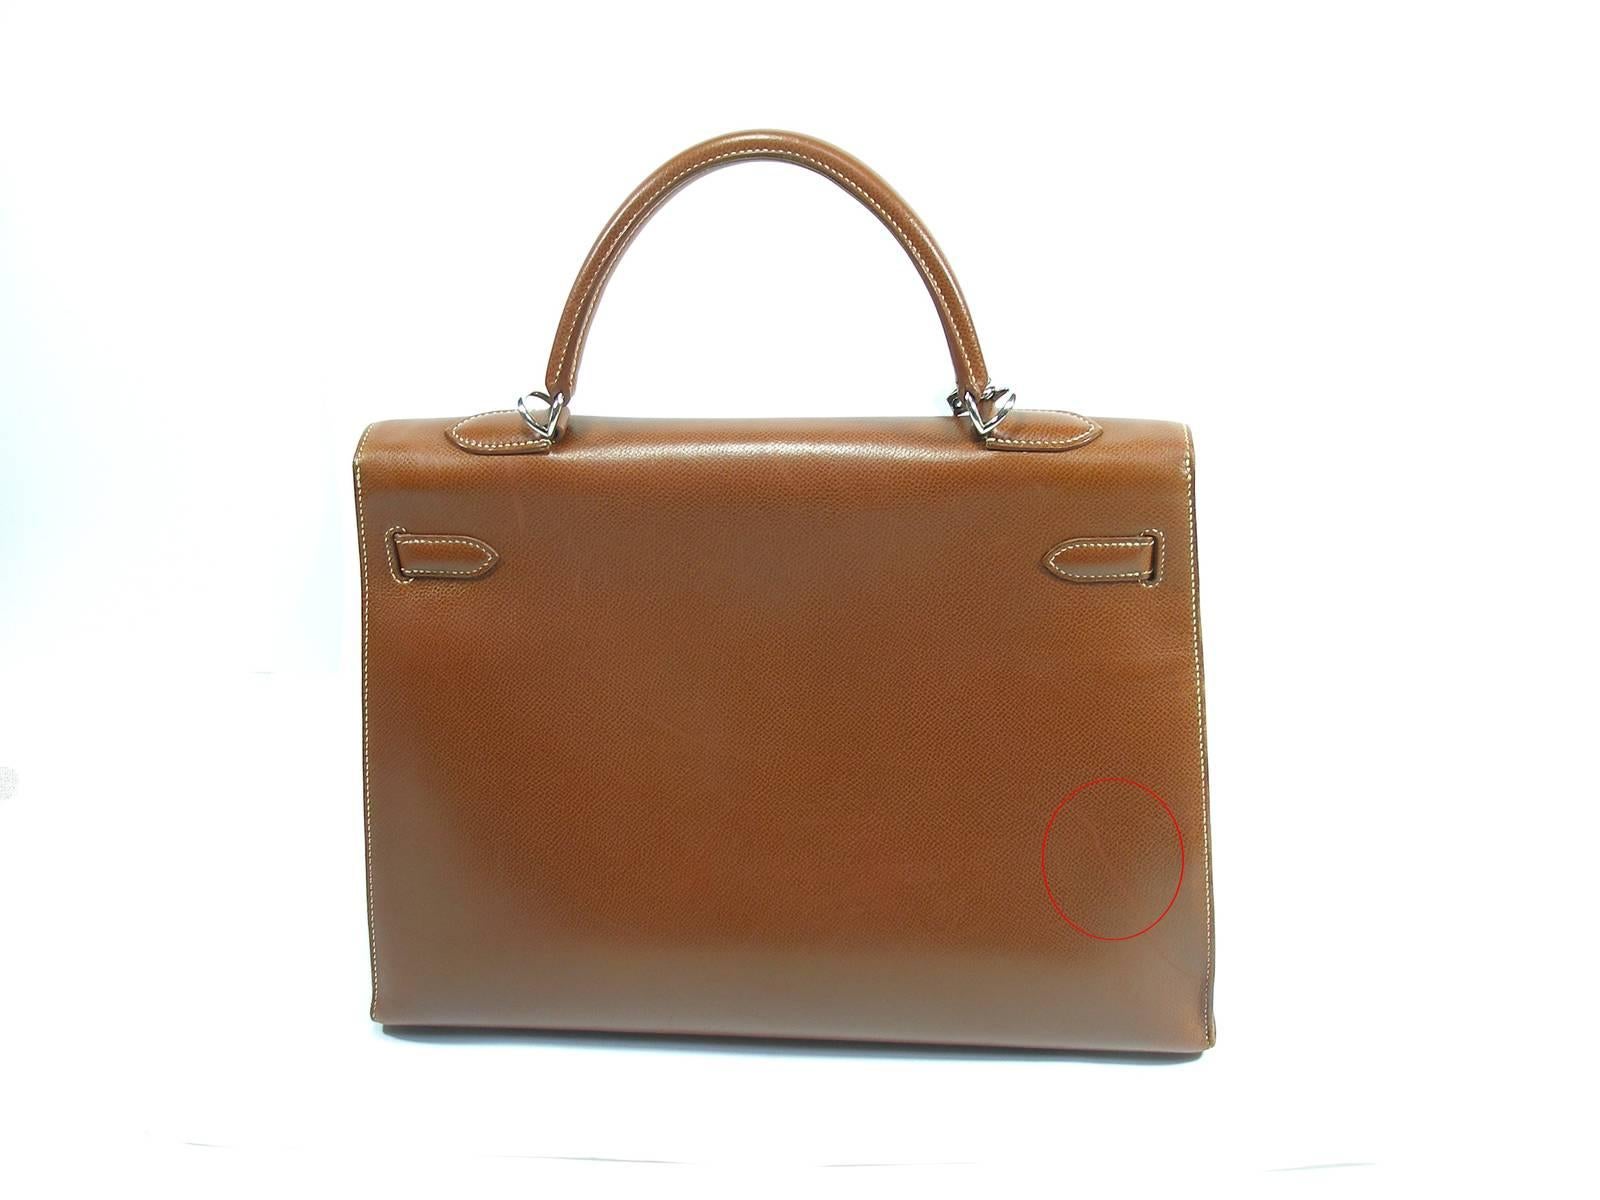 Hermès Kelly Bag 2 / 35 cm 
Brown and palladium hardware 
RARE Leather grainé 
Stamp G in the square ( production 2003 )
Please note : no amovible strap / no clochette / only 1 key for cadenas
The corners of the bag have been restored
Some marks on